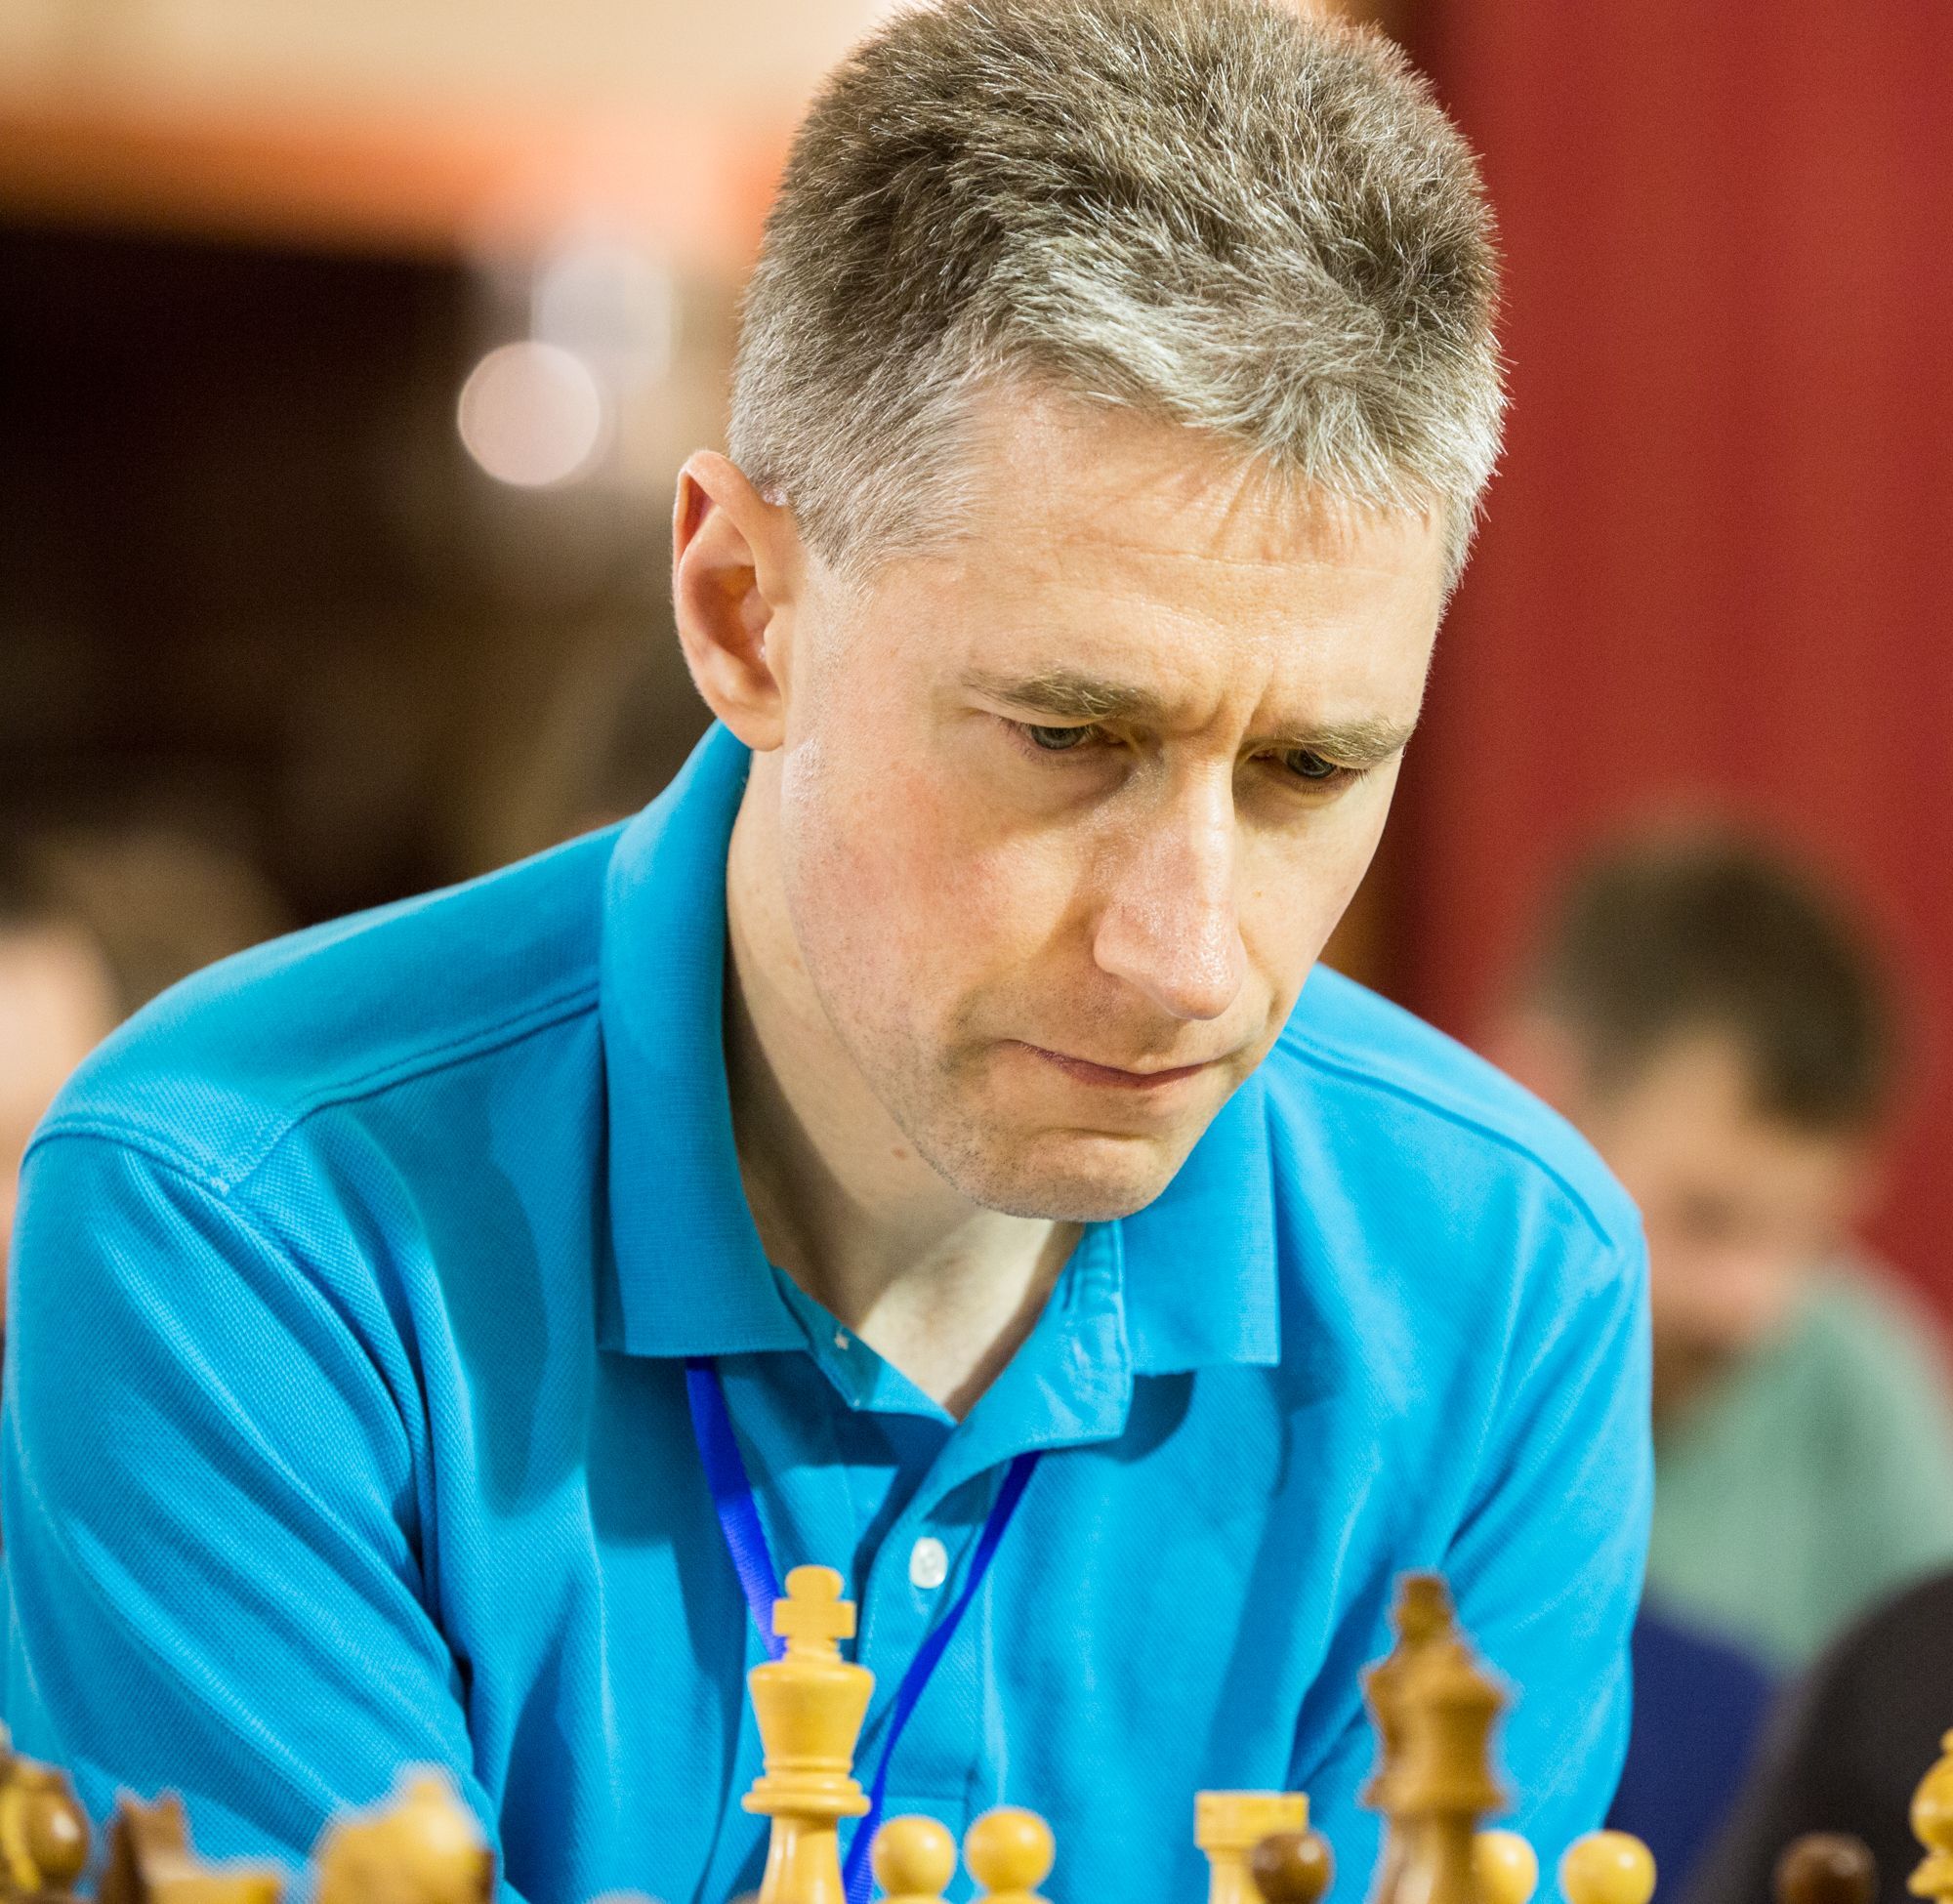 ChessBase India - Michael Adams is a 7-time British